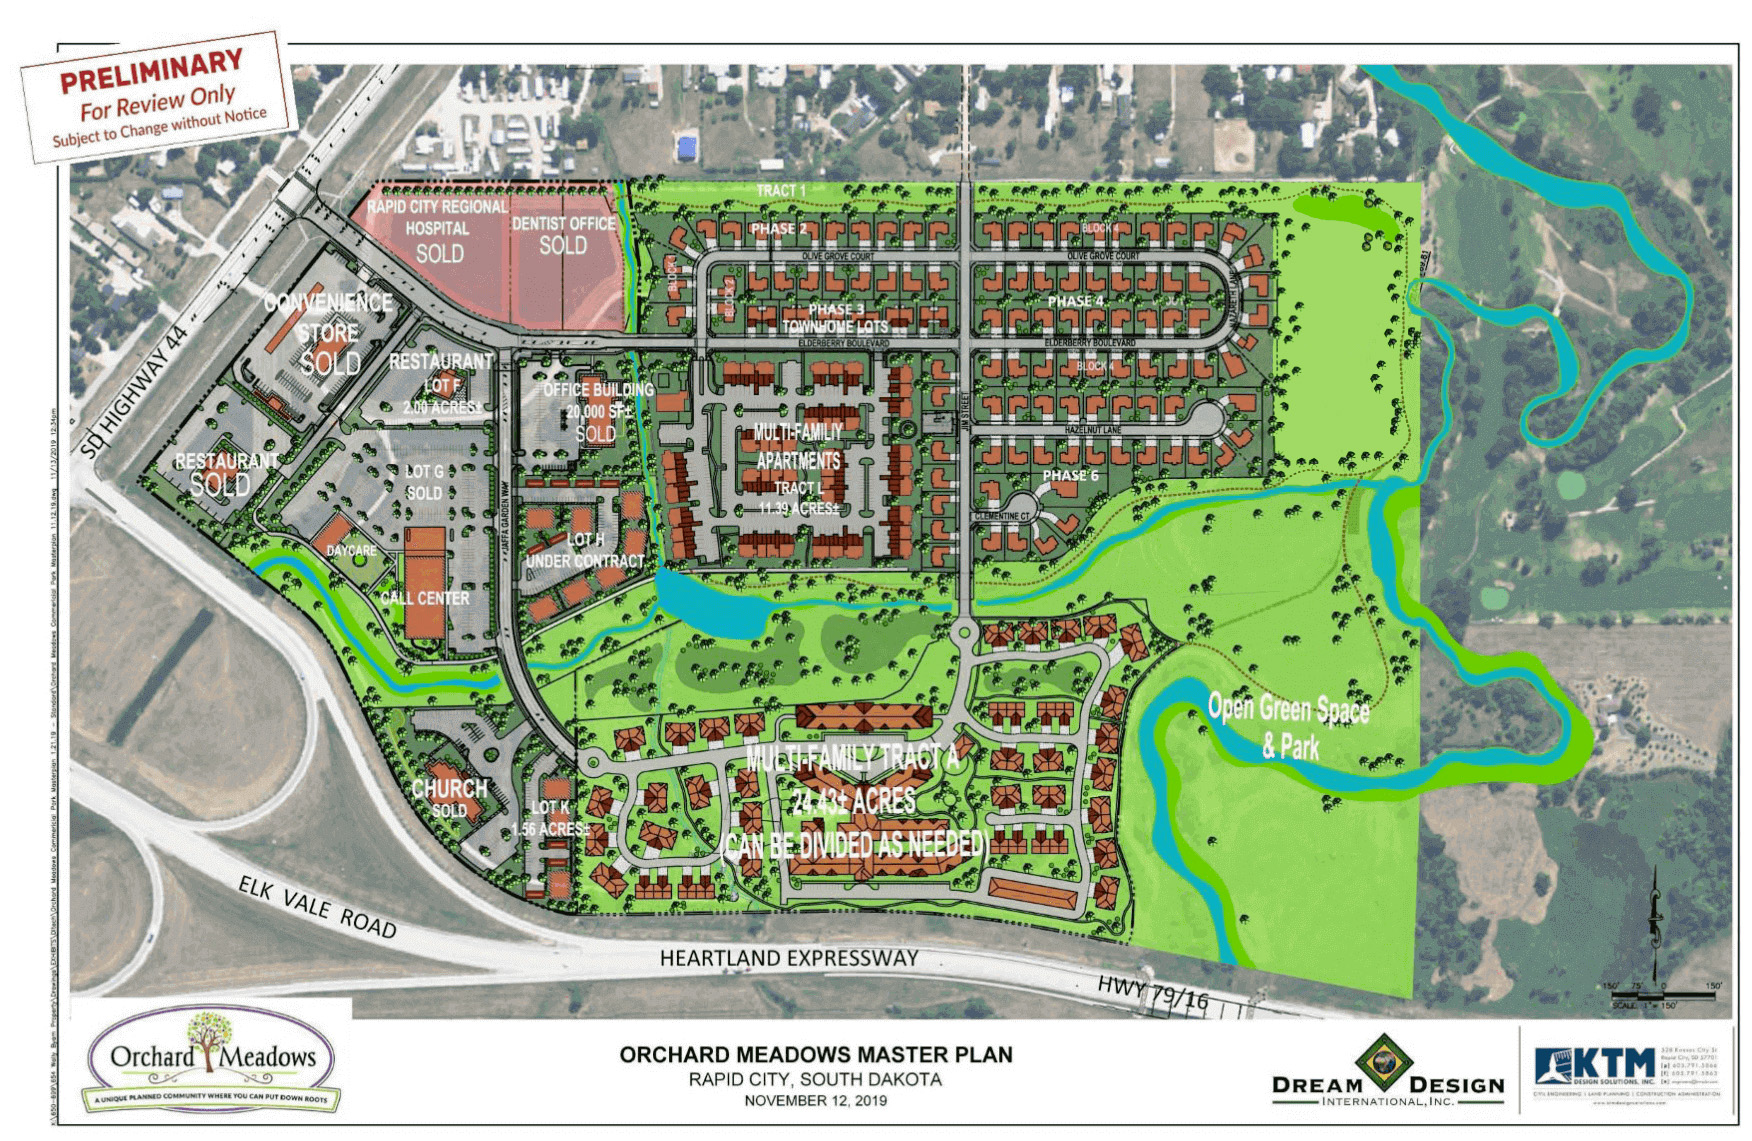 Orchard Meadows Master Plan